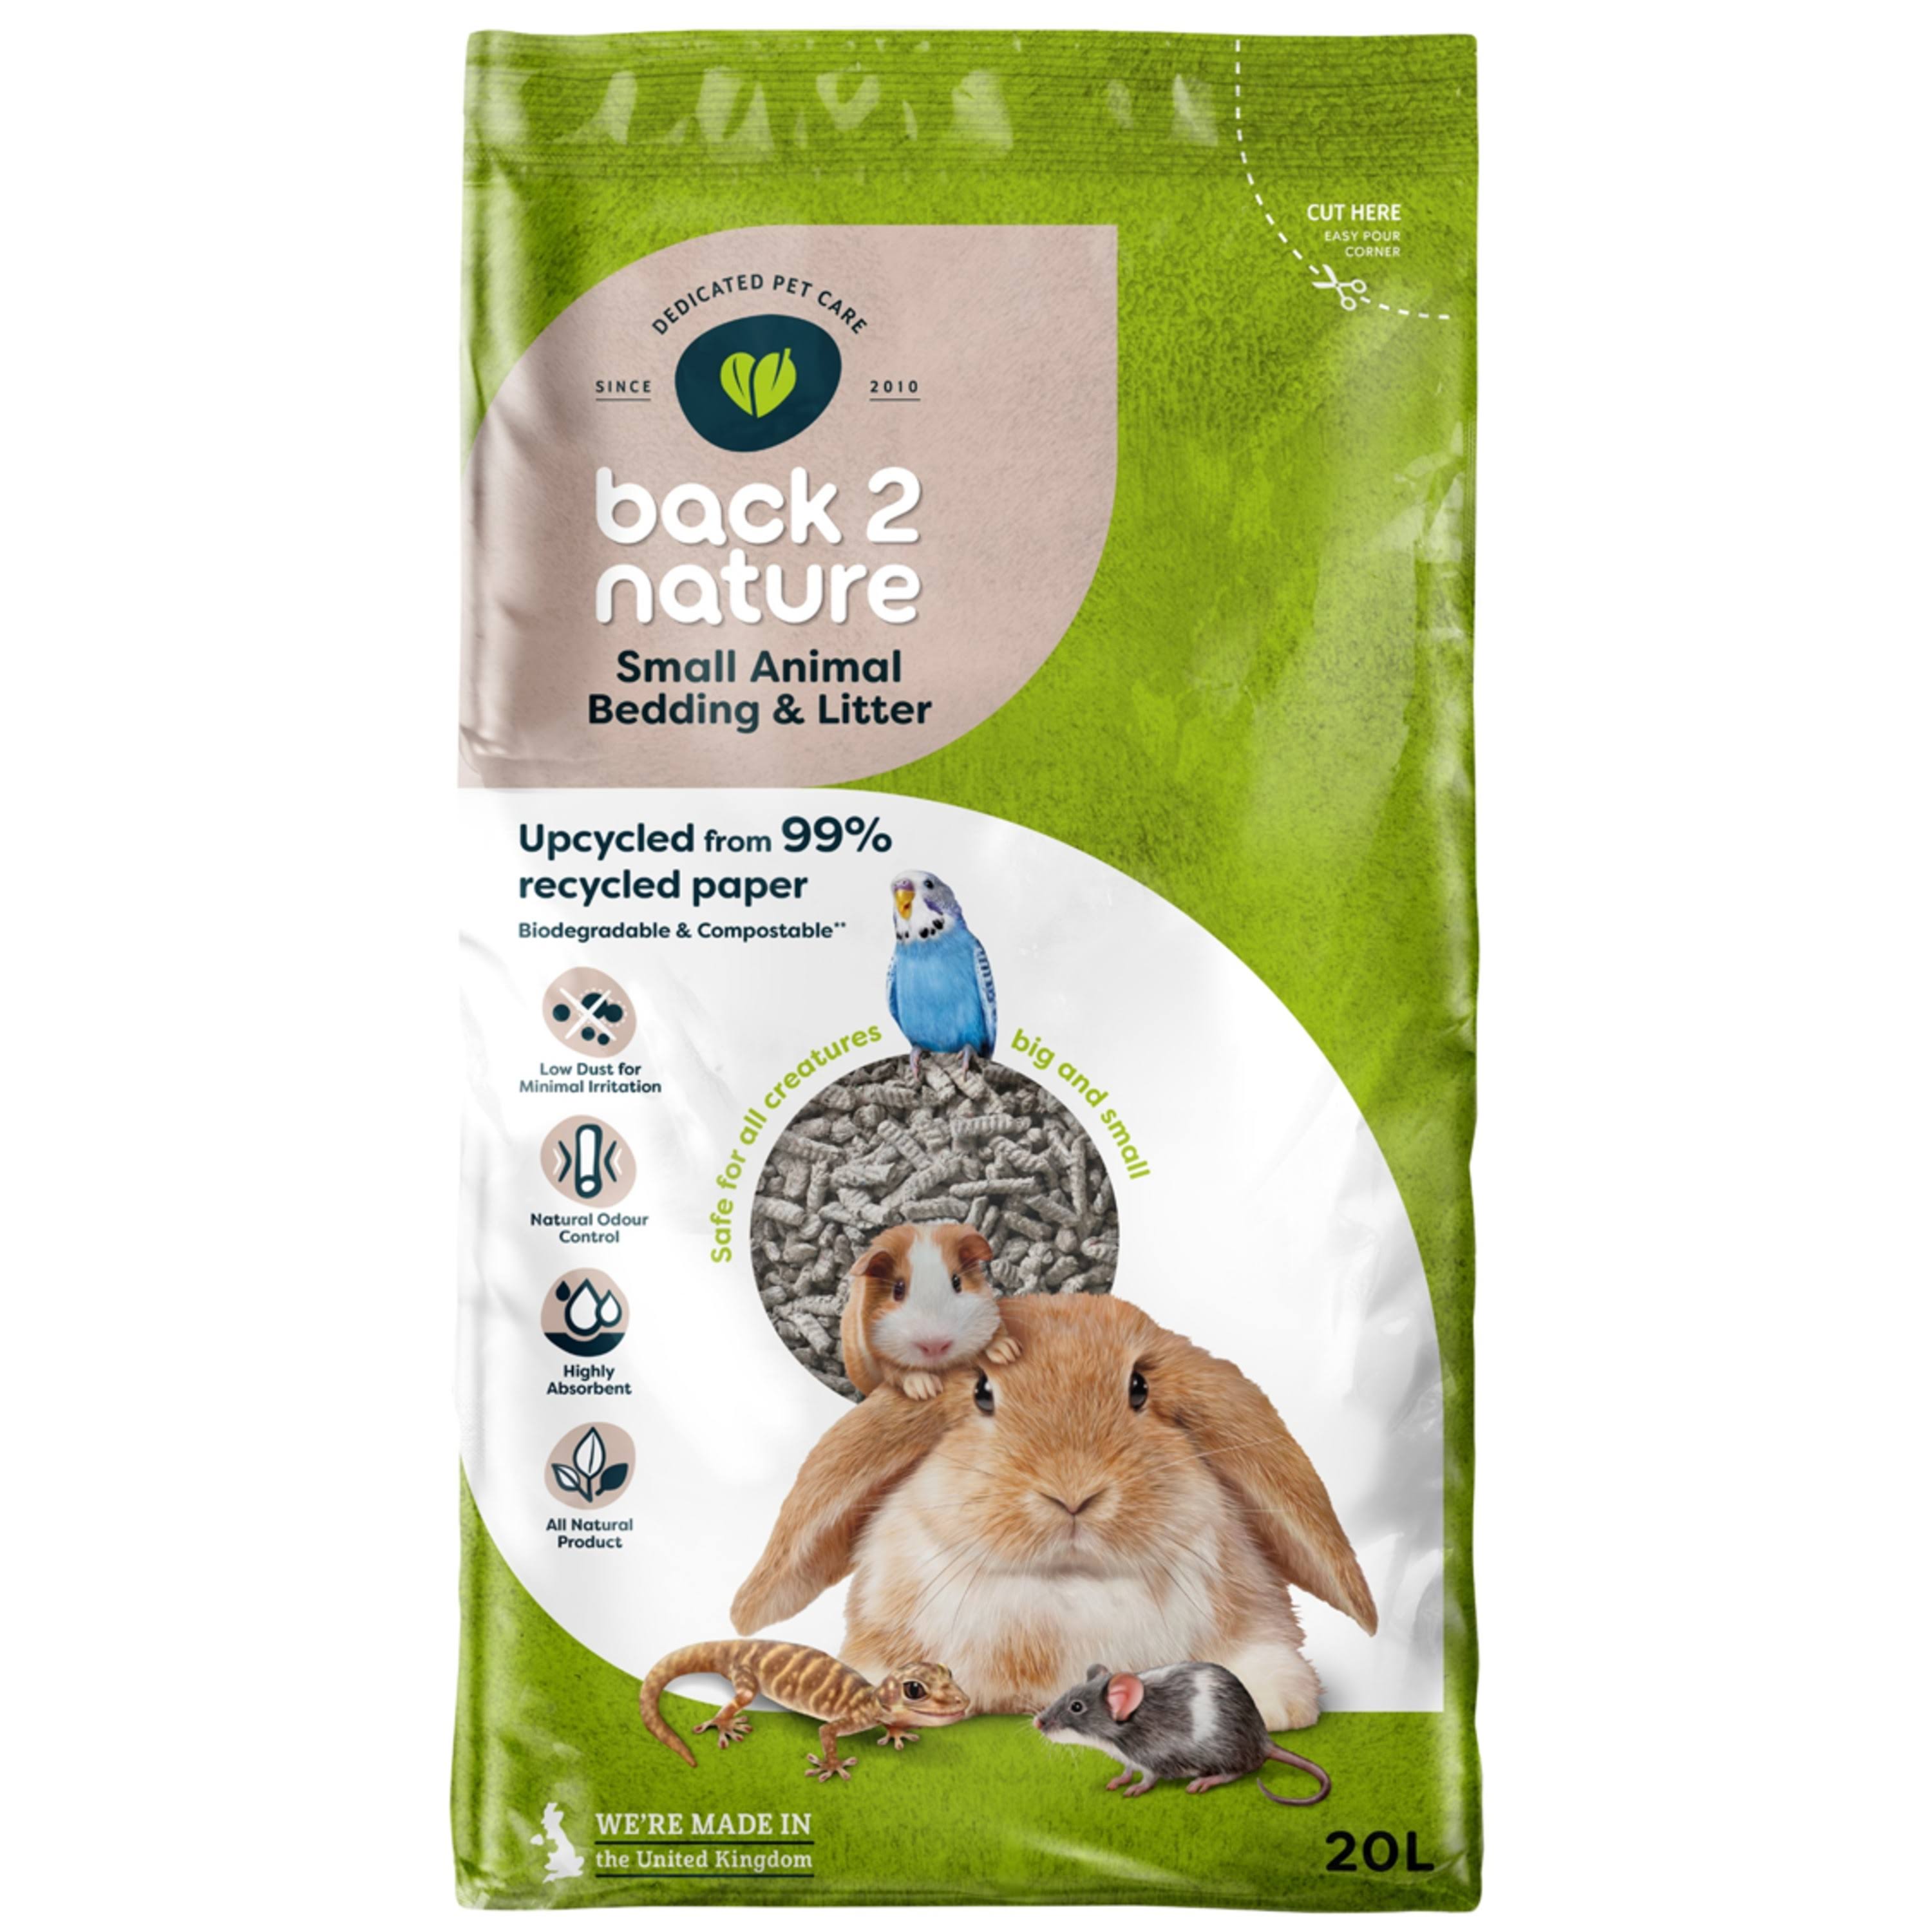 Back-2-Nature Small Animal Bedding and Litter 20L